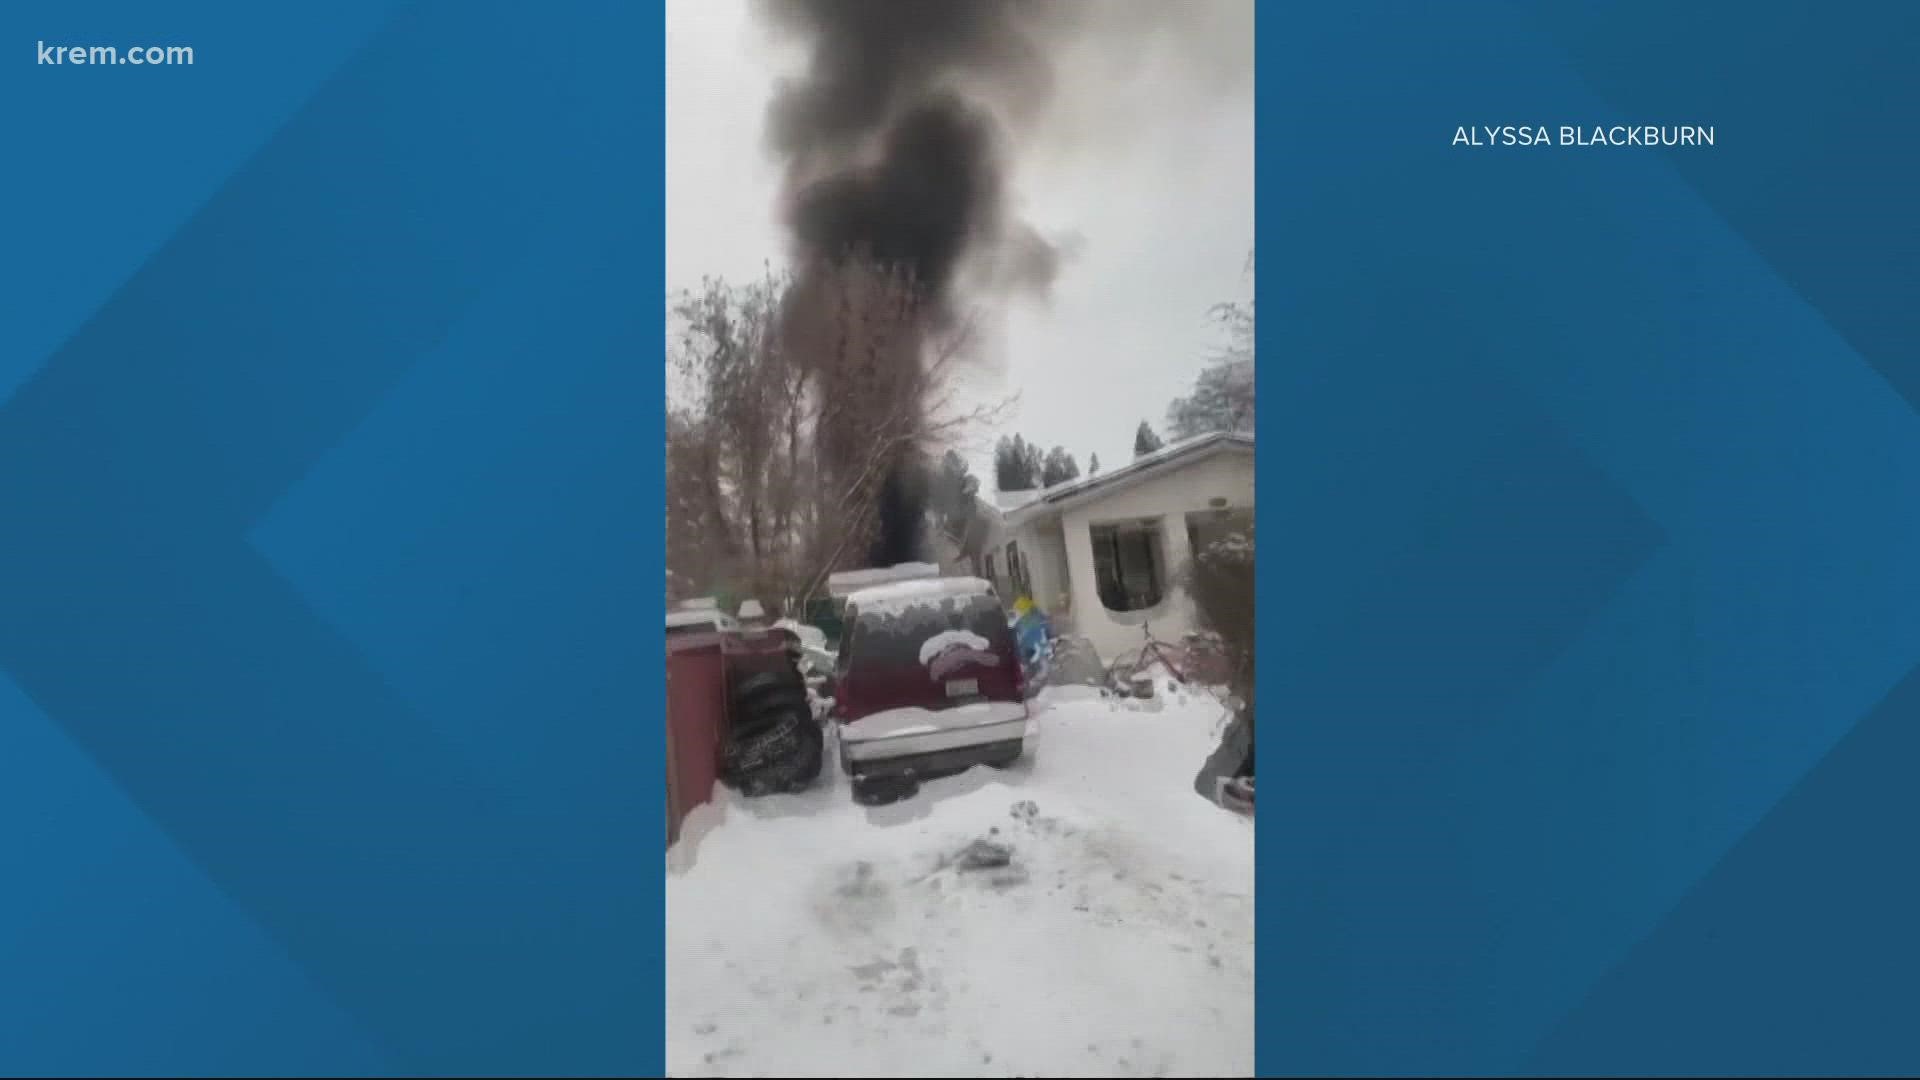 11 children were taken into protective custody after a rubbish fire broke out in the backyard of a house on 6th Avenue in Spokane on Sunday morning.